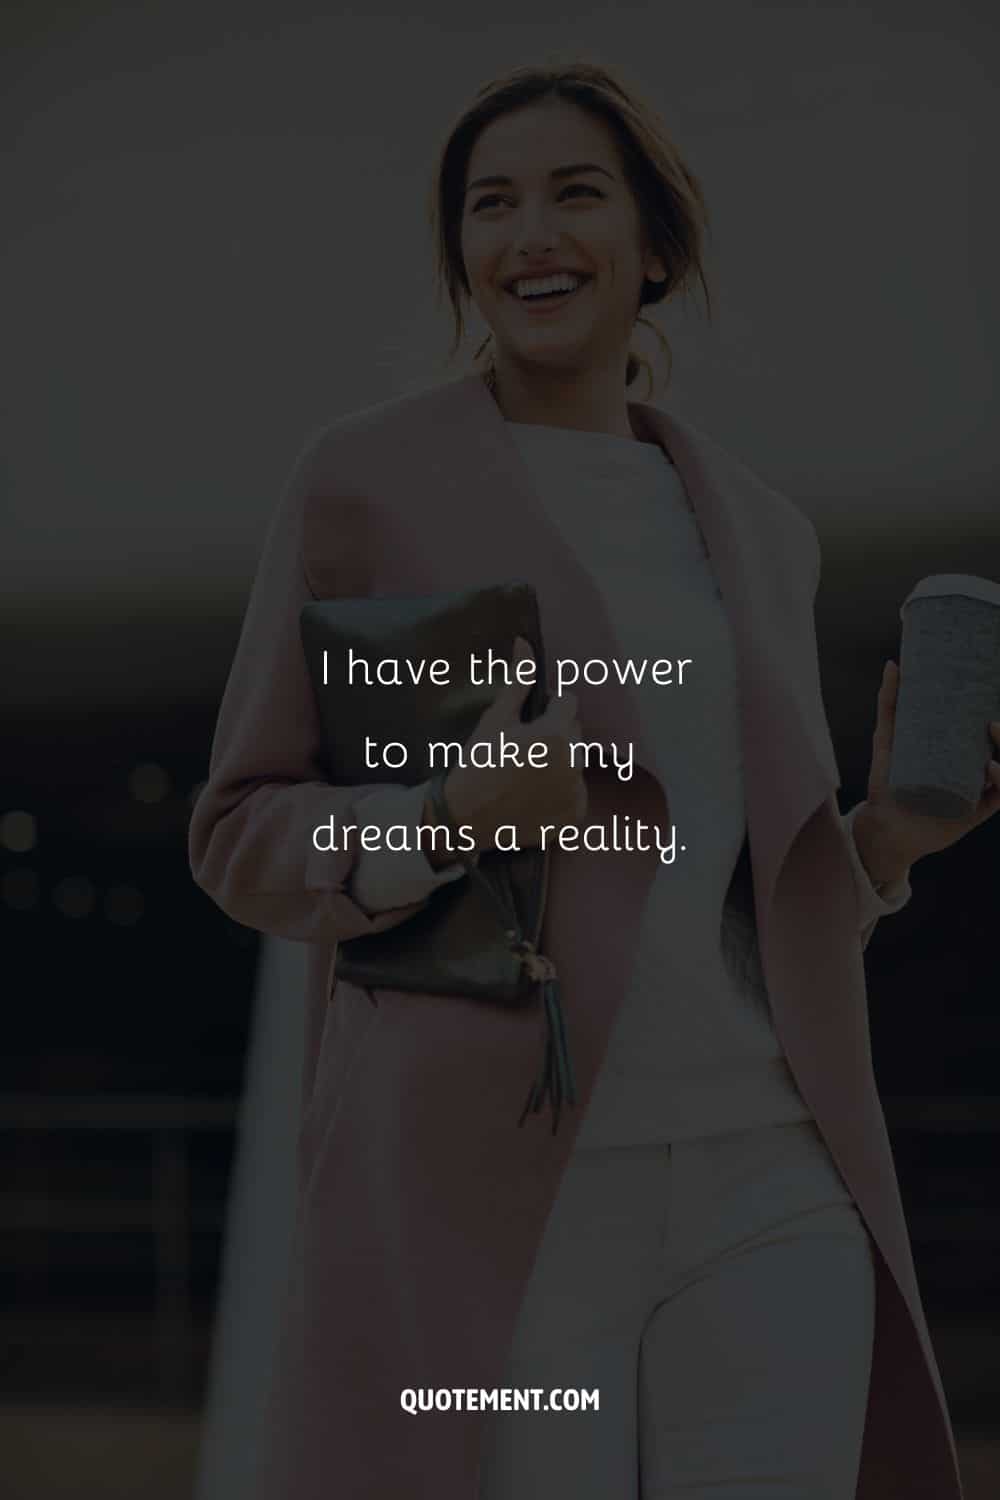 Image of a woman holding a coffee representing an affirmation for confidence